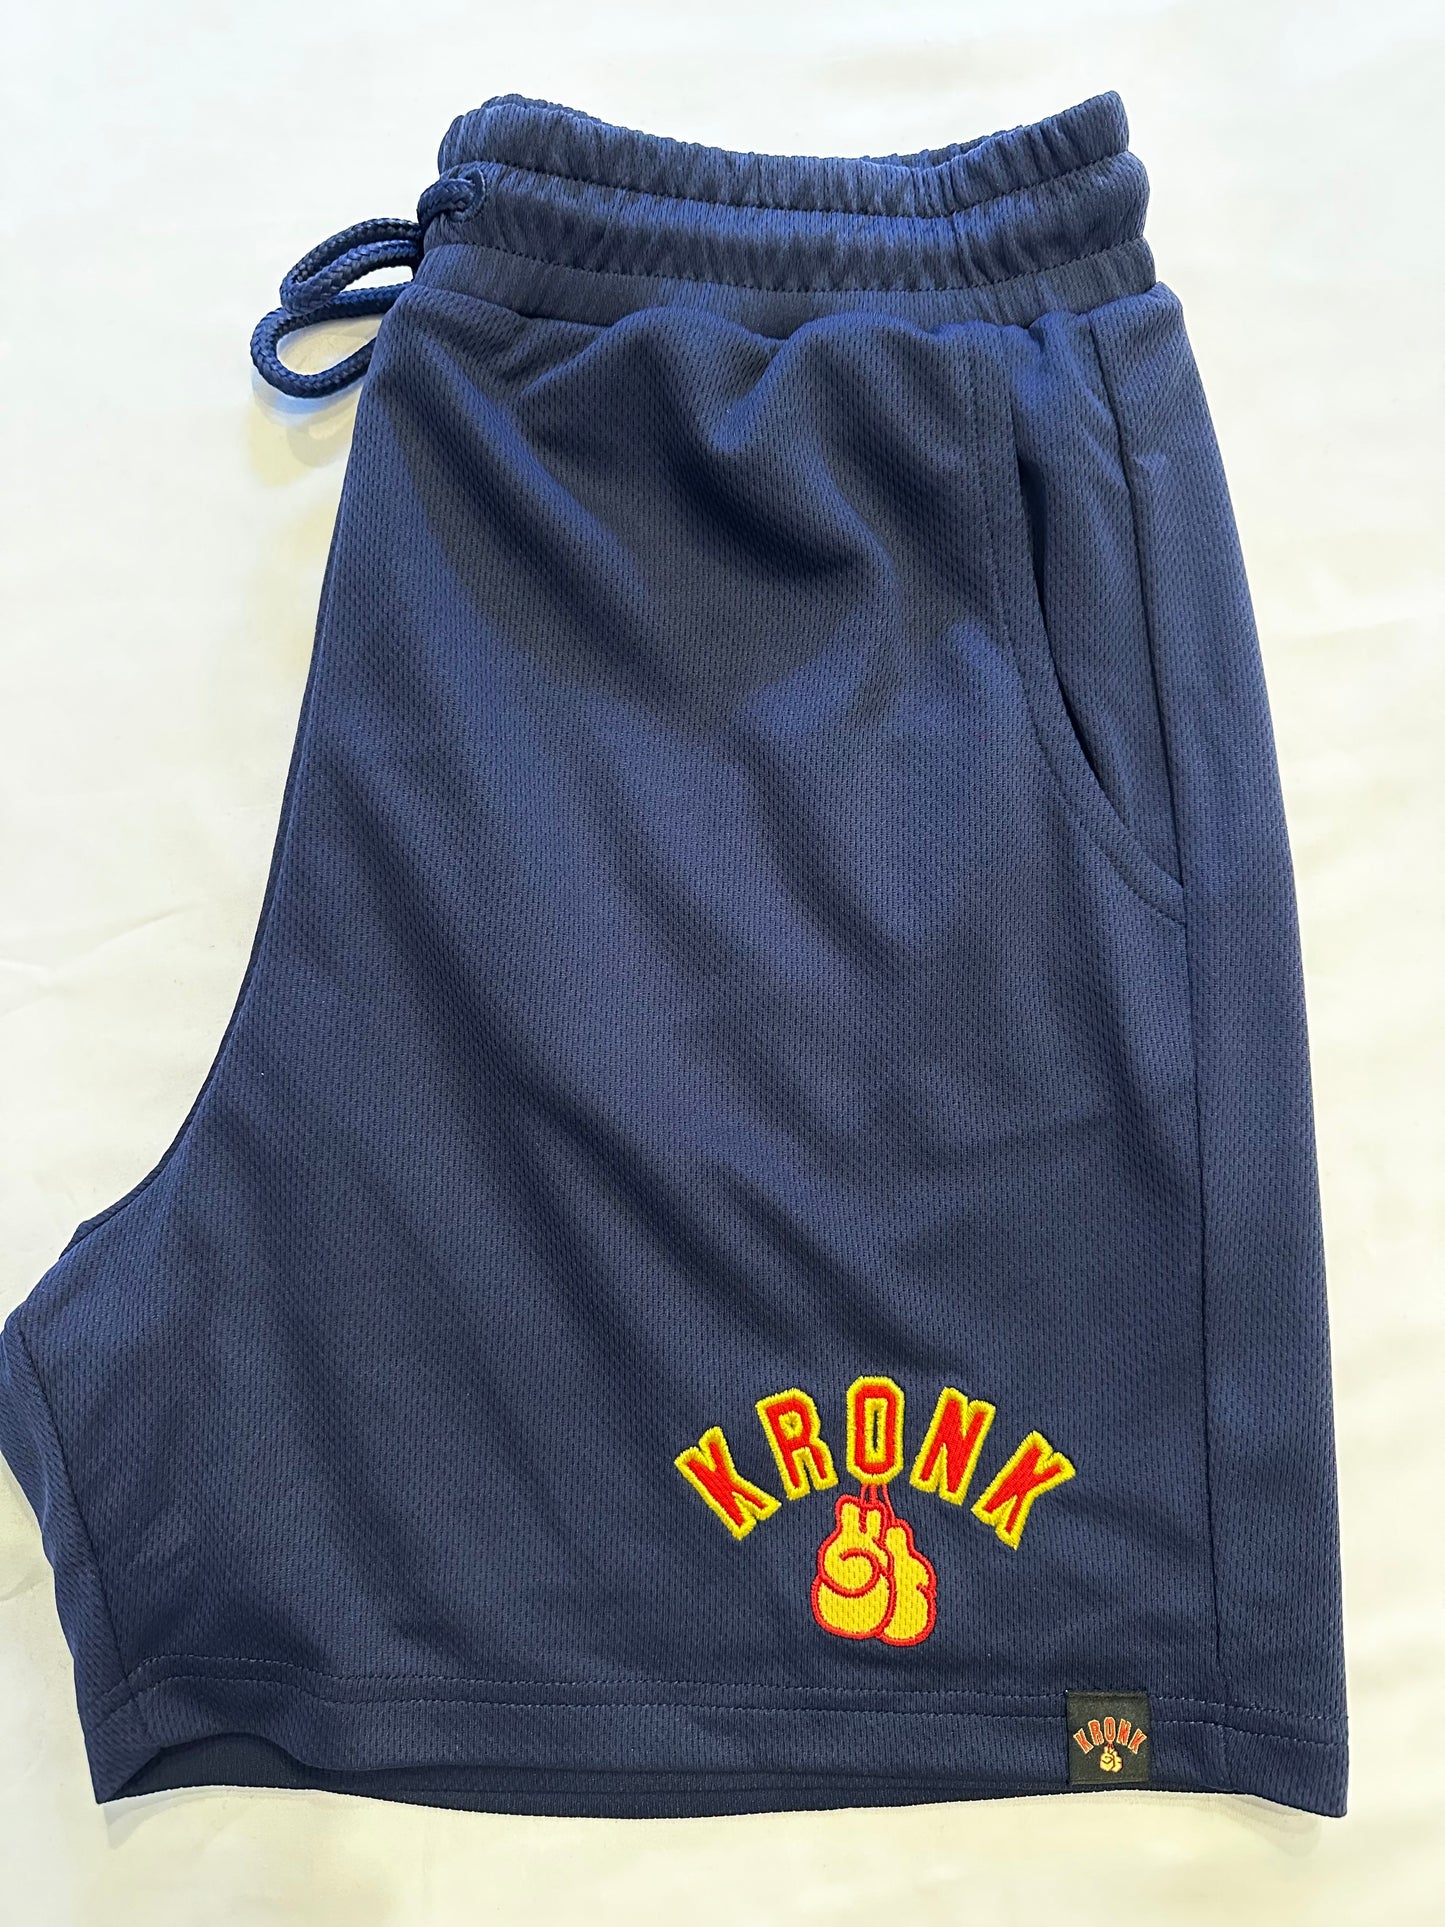 KRONK Gloves Applique Lined Gym Shorts Navy